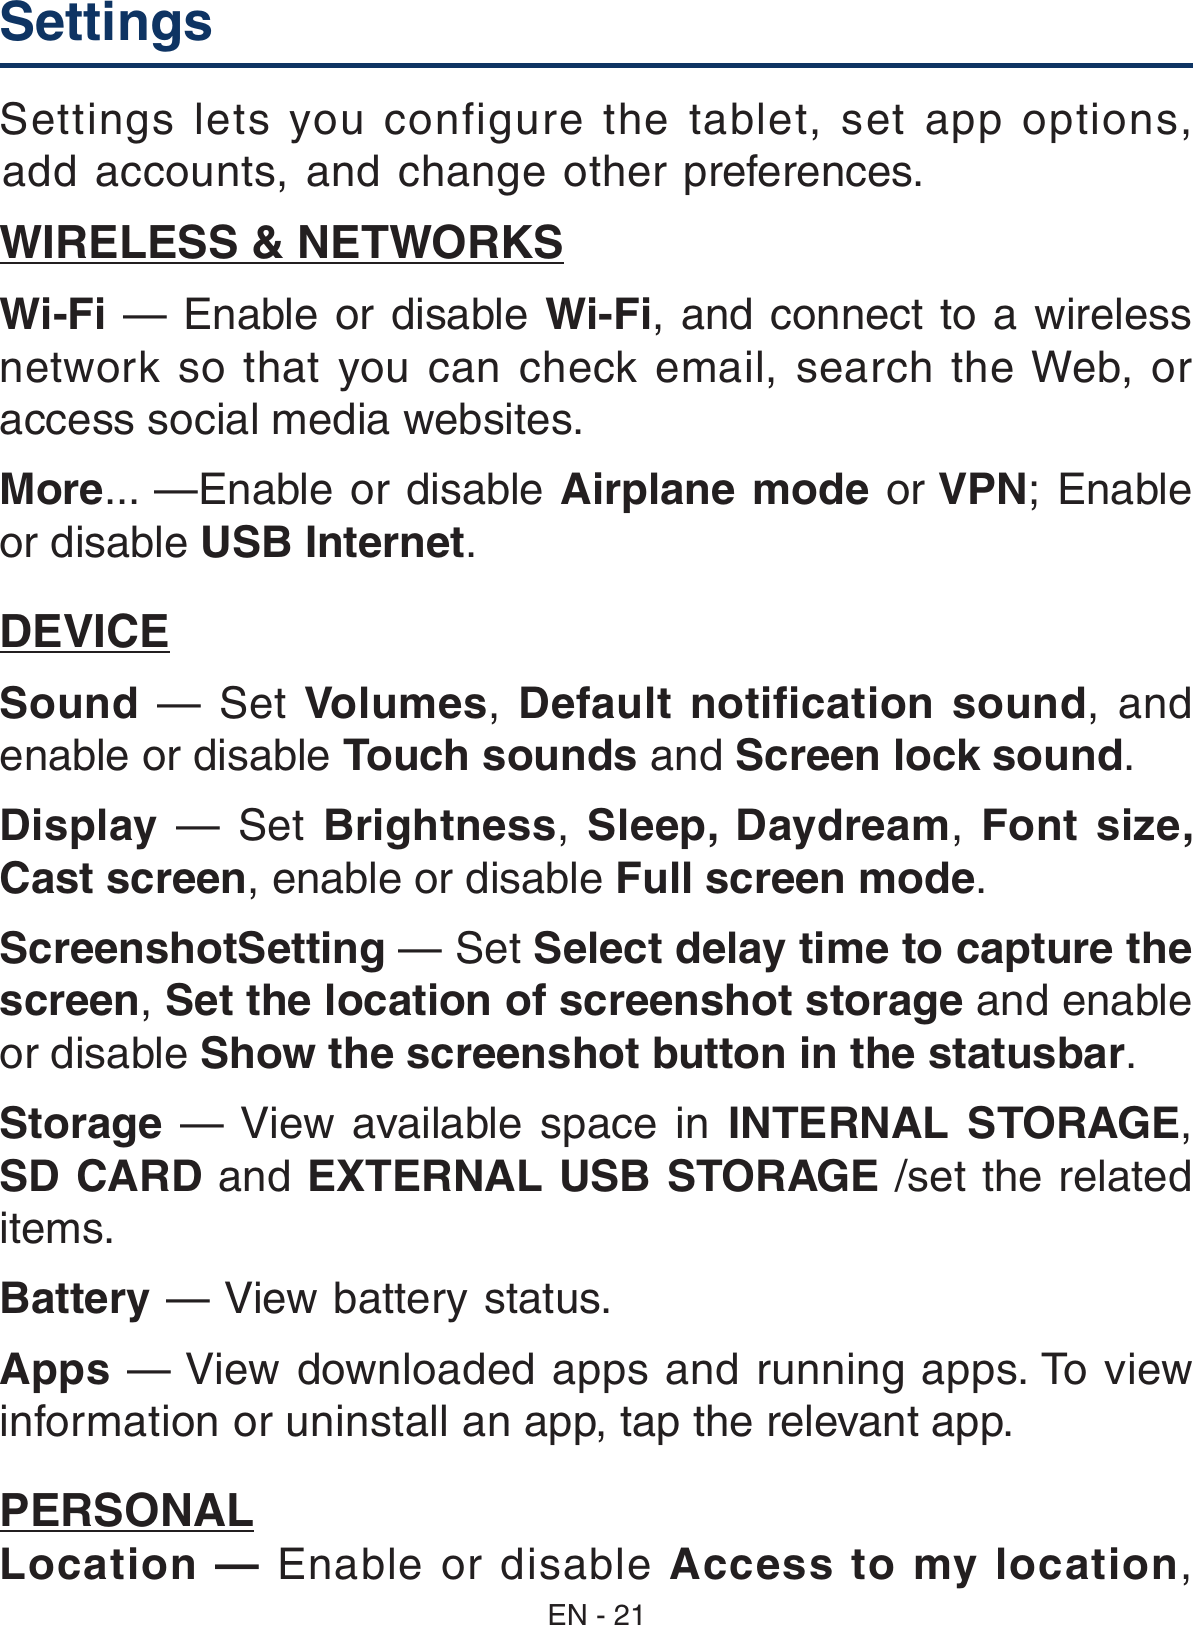 Settings  Settings lets you configure the tablet, set app options, add accounts, and change other preferences. WIRELESS &amp; NETWORKSWi-Fi — Enable or disable Wi-Fi, and connect to a wireless network  so  that  you  can  check  email,  search  the Web,  or access social media websites.More... —Enable or disable Airplane mode or VPN; Enable or disable USB Internet.DEVICESound  —  Set  Volumes,  Default  notification sound,  and enable or disable Touch sounds and Screen lock sound. Display —  Set  Brightness,  Sleep,  Daydream,  Font  size, Cast screen, enable or disable Full screen mode.ScreenshotSetting — Set Select delay time to capture the screen, Set the location of screenshot storage and enable or disable Show the screenshot button in the statusbar.Storage  — View  available  space  in  INTERNAL  STORAGE, SD CARD and EXTERNAL USB STORAGE /set the related items.Battery — View battery status.Apps — View downloaded apps and running apps. To view information or uninstall an app, tap the relevant app.PERSONALLocation — Enable or disable Access to my location, EN - 21